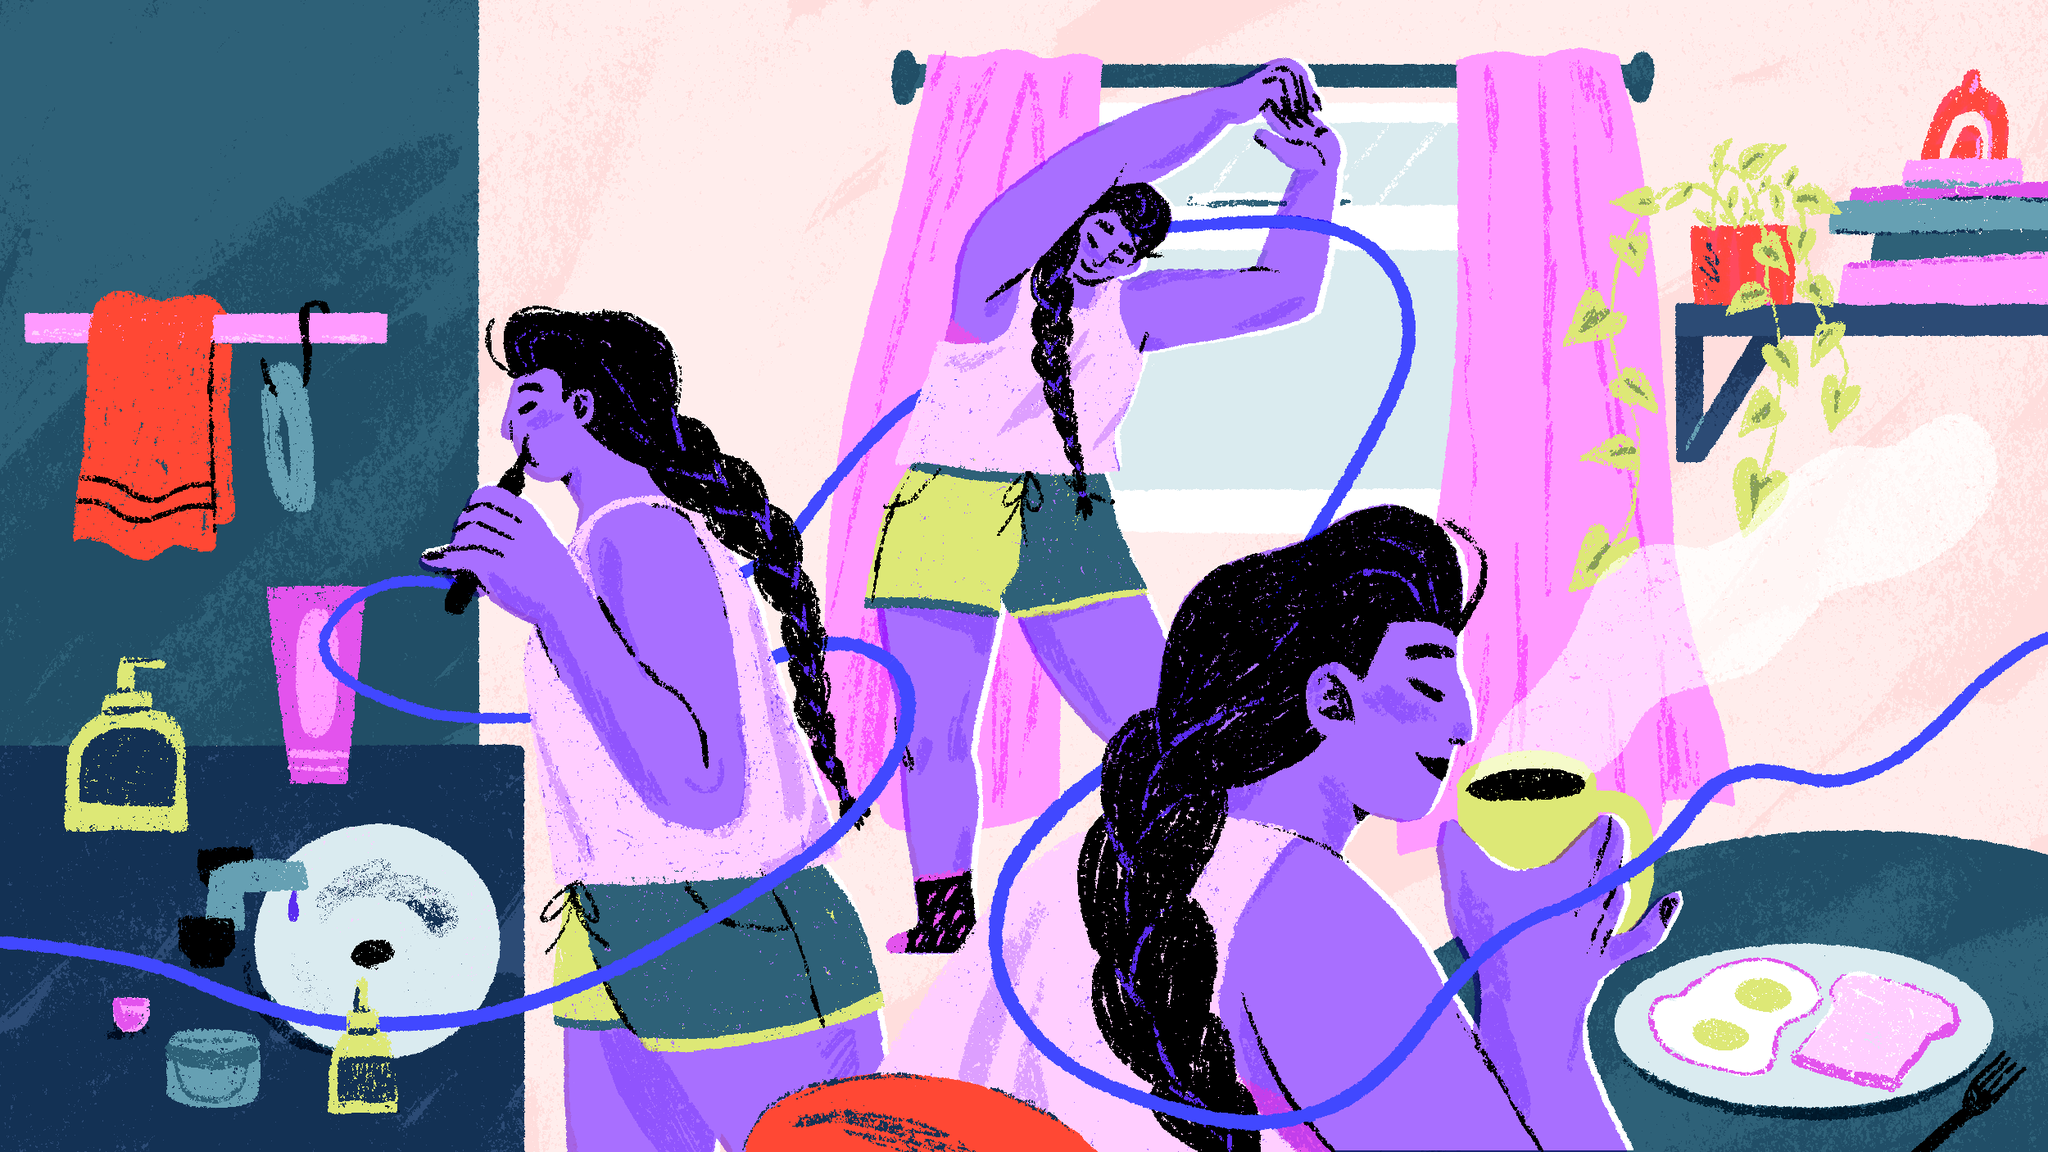 illustration of a woman doing multiple activities like brushing teeth and working out